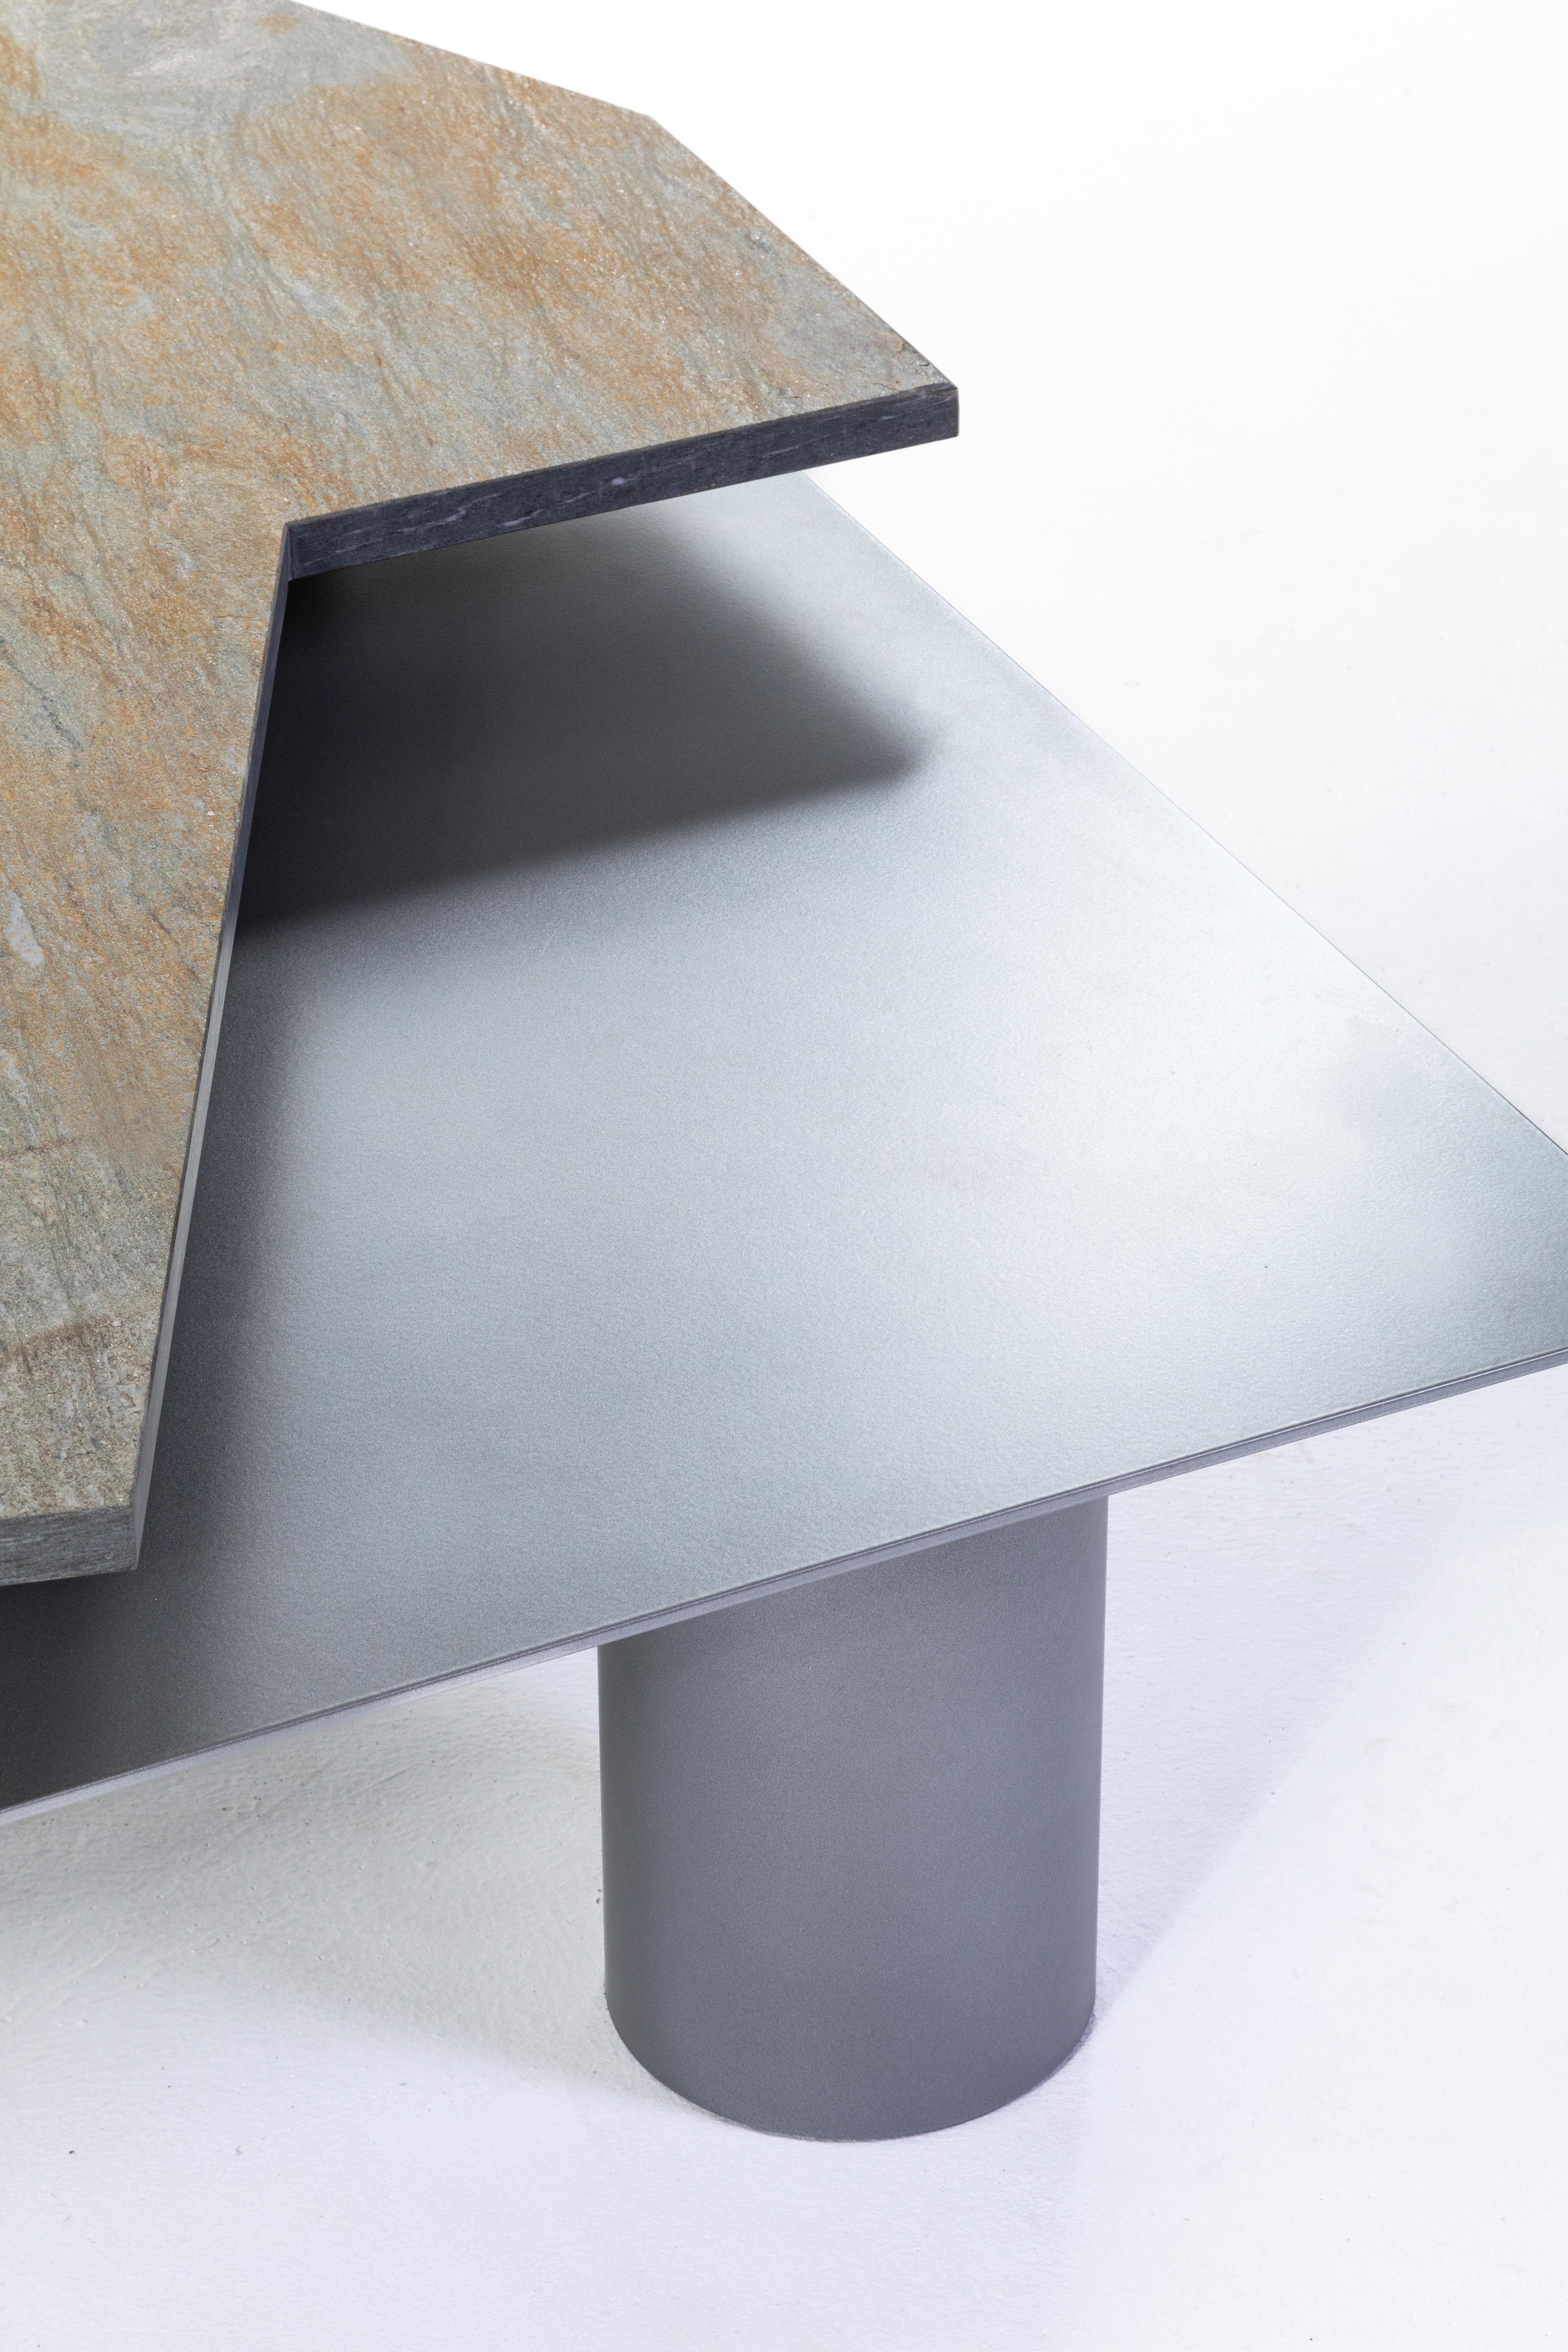 San Peyre coffee table, Stone & Aluminum by 13 Desserts
Limited edition designed by Clément Rougelot.

San Peyre is a two-levels granite and aluminum table. The shape of the stone top is dictated by the material itself, and cut from pieces of